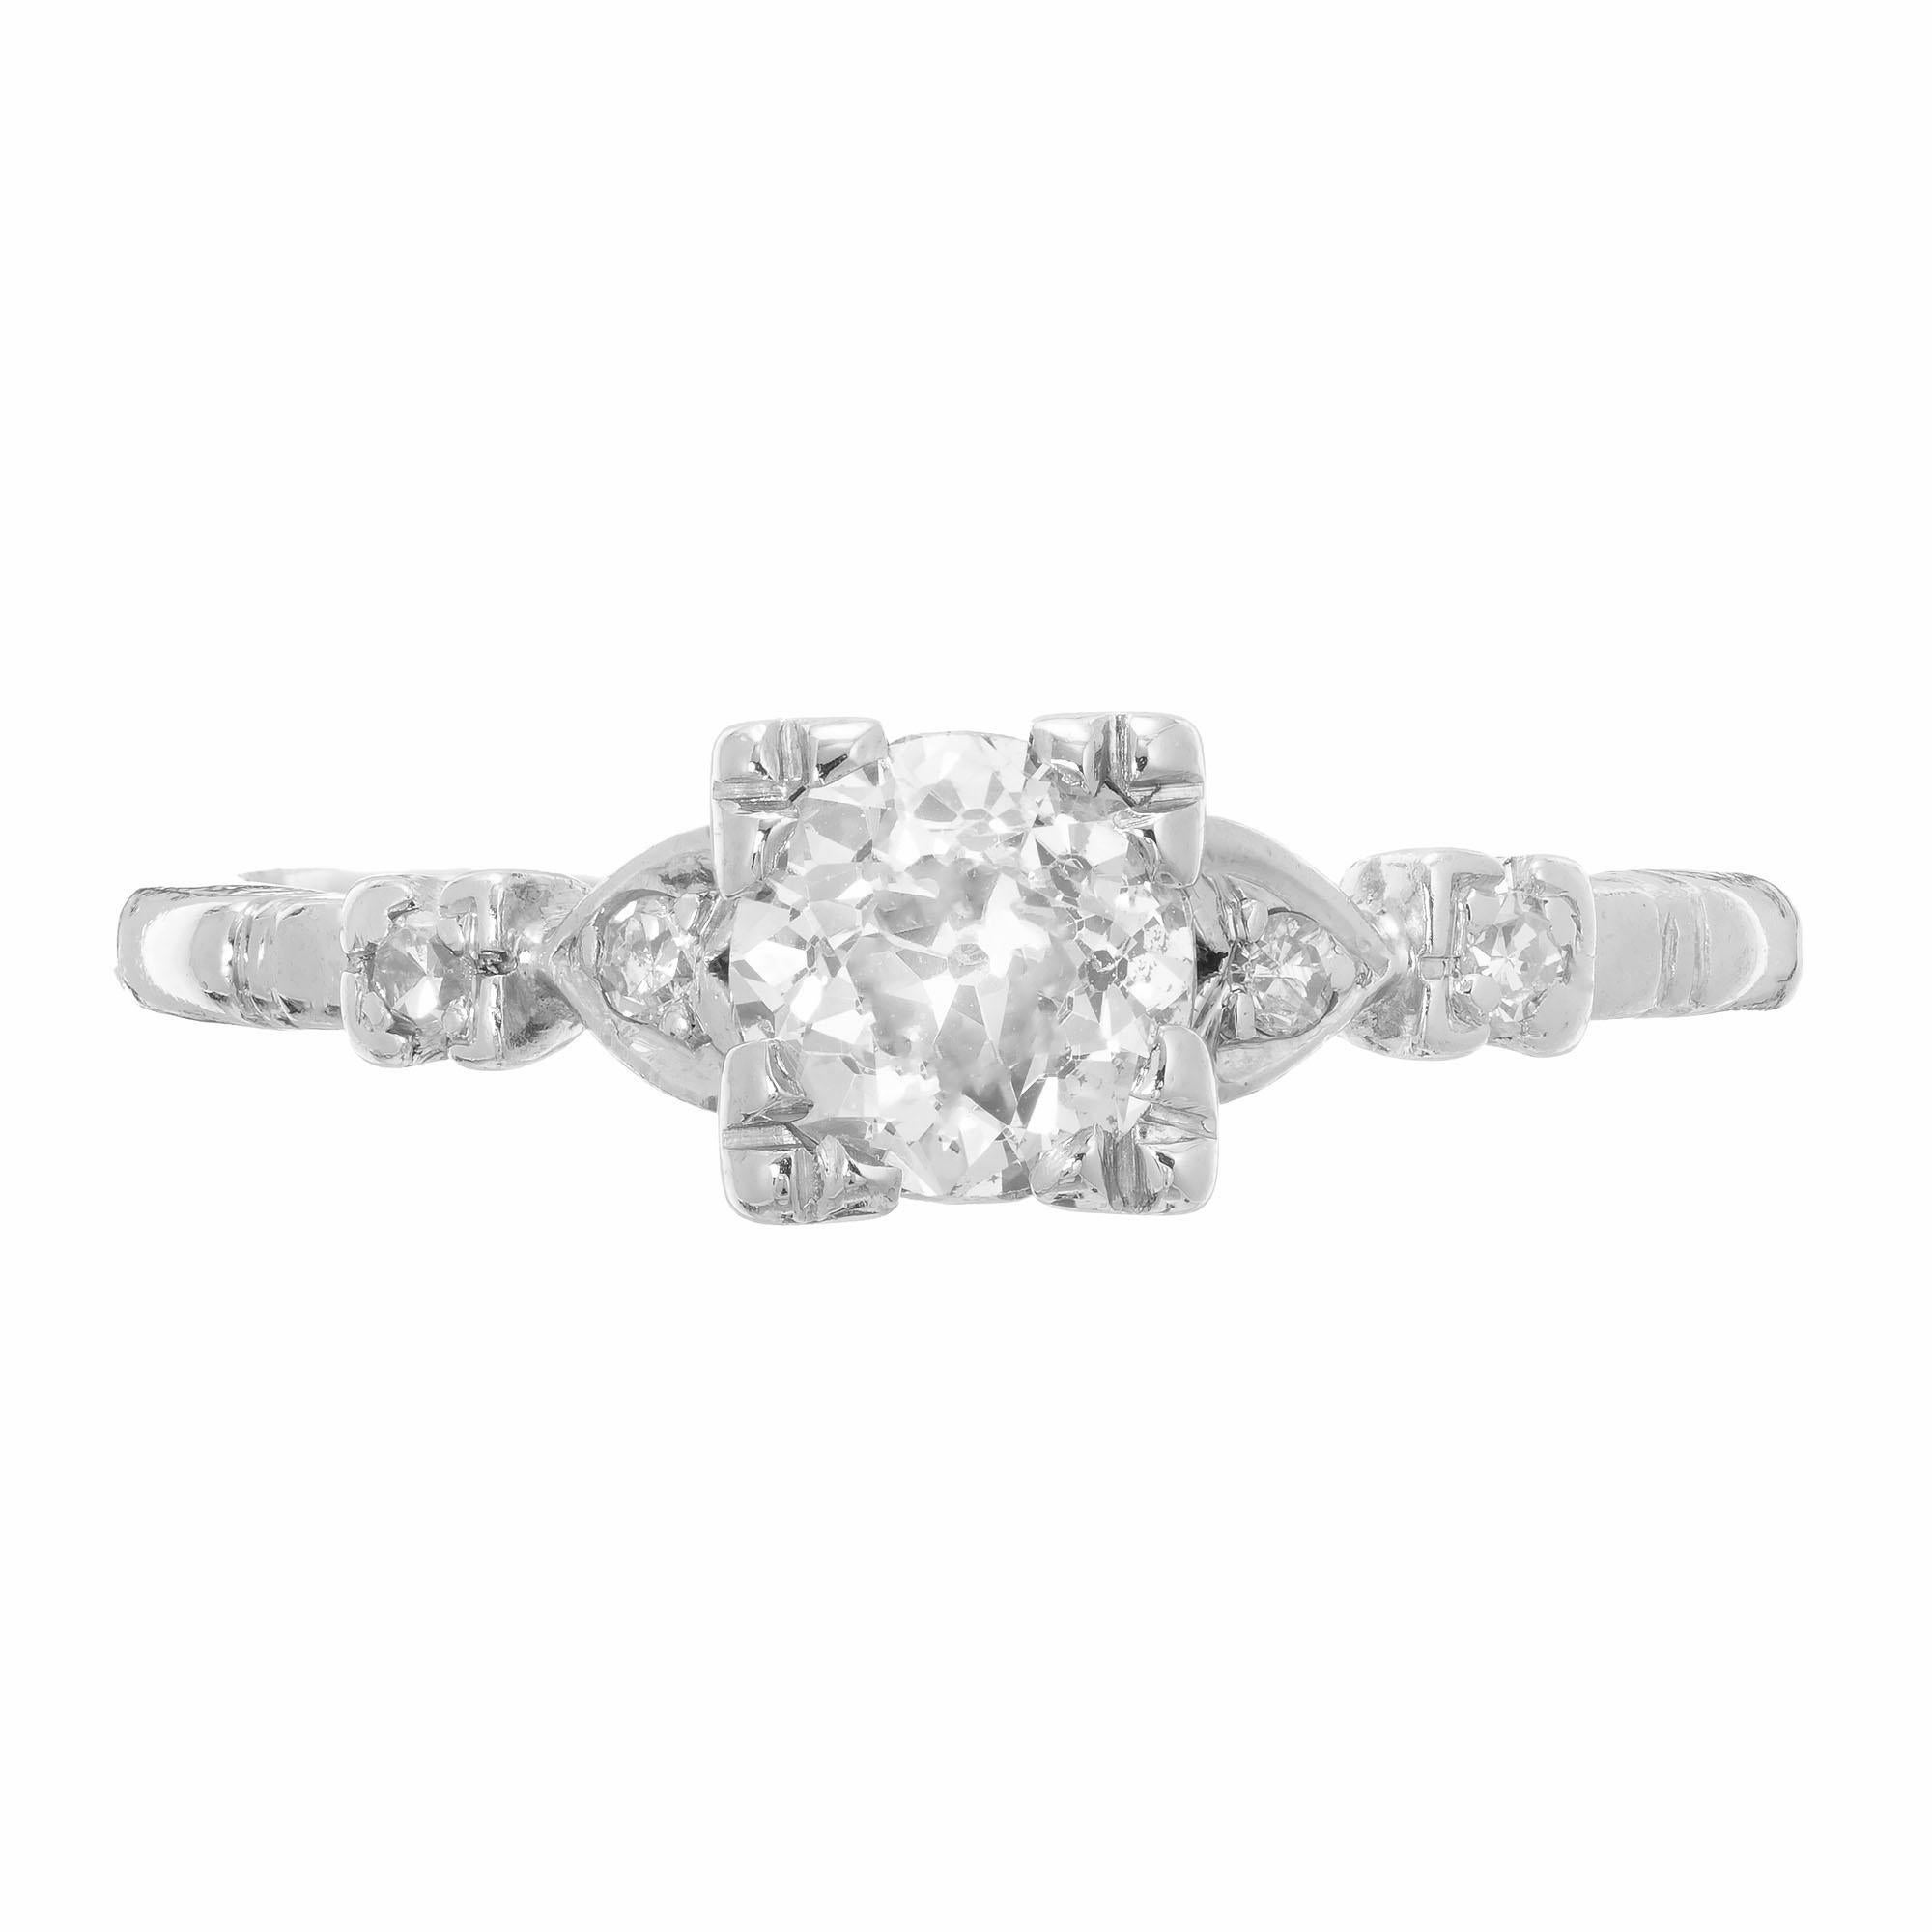 Art Deco 1920-1929 Diamond Platinum engagement ring. EGL certified Old European cut center stone with 4 side diamonds in a platinum setting. 

1 old European cut diamond, approx. total weight .80ct, H to I, SI1, 5.92 x 5.90 x 3.60mm, Depth: 60.9%